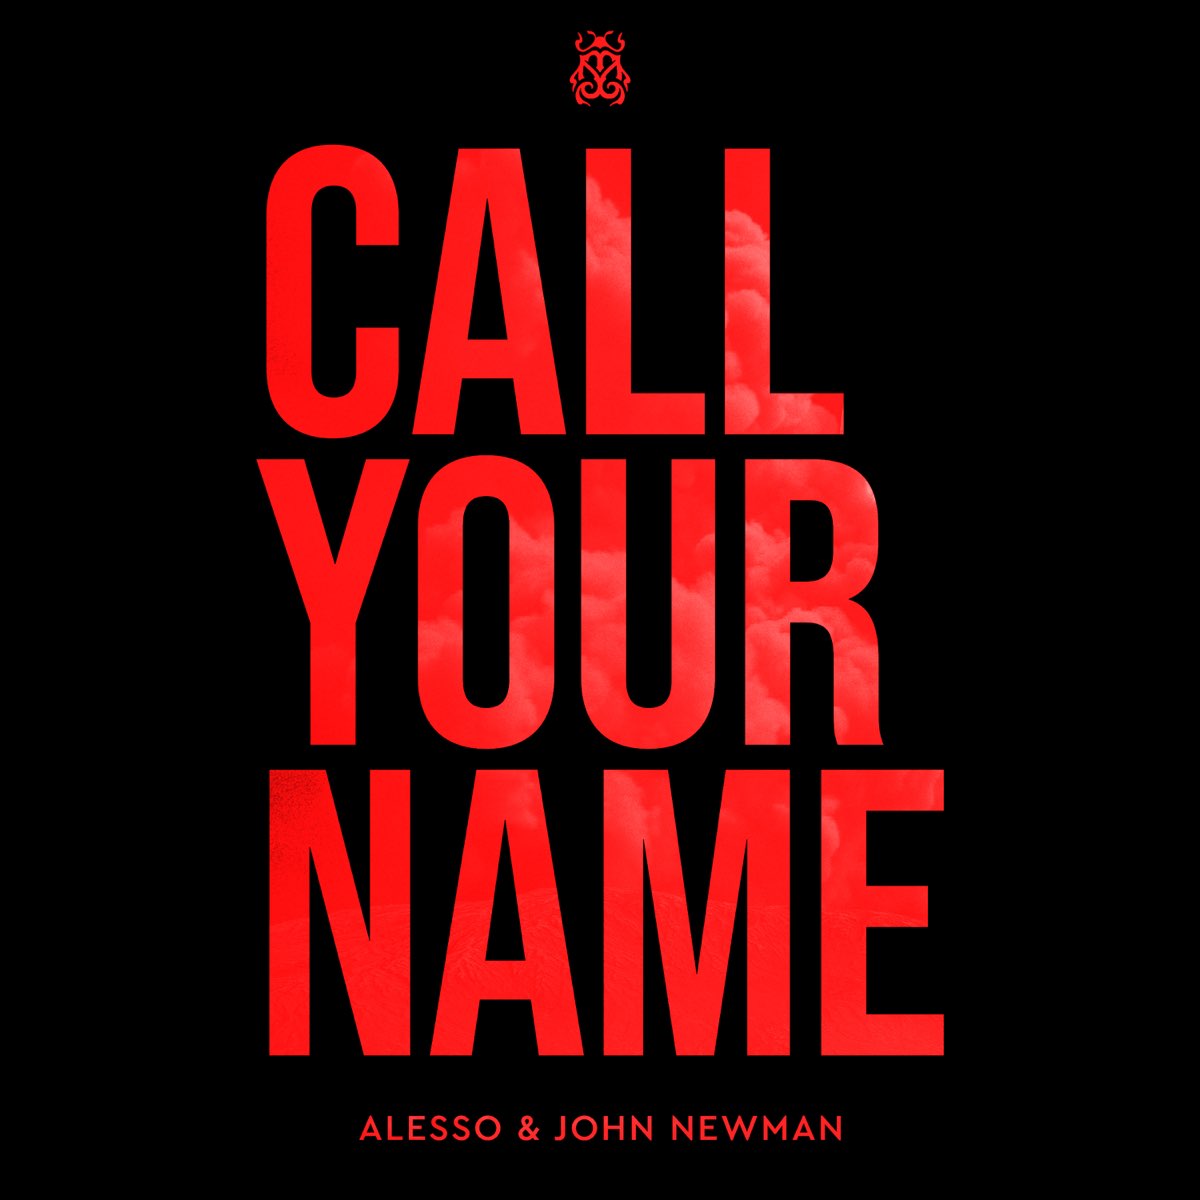 Alesso & John Newman — Call Your Name cover artwork